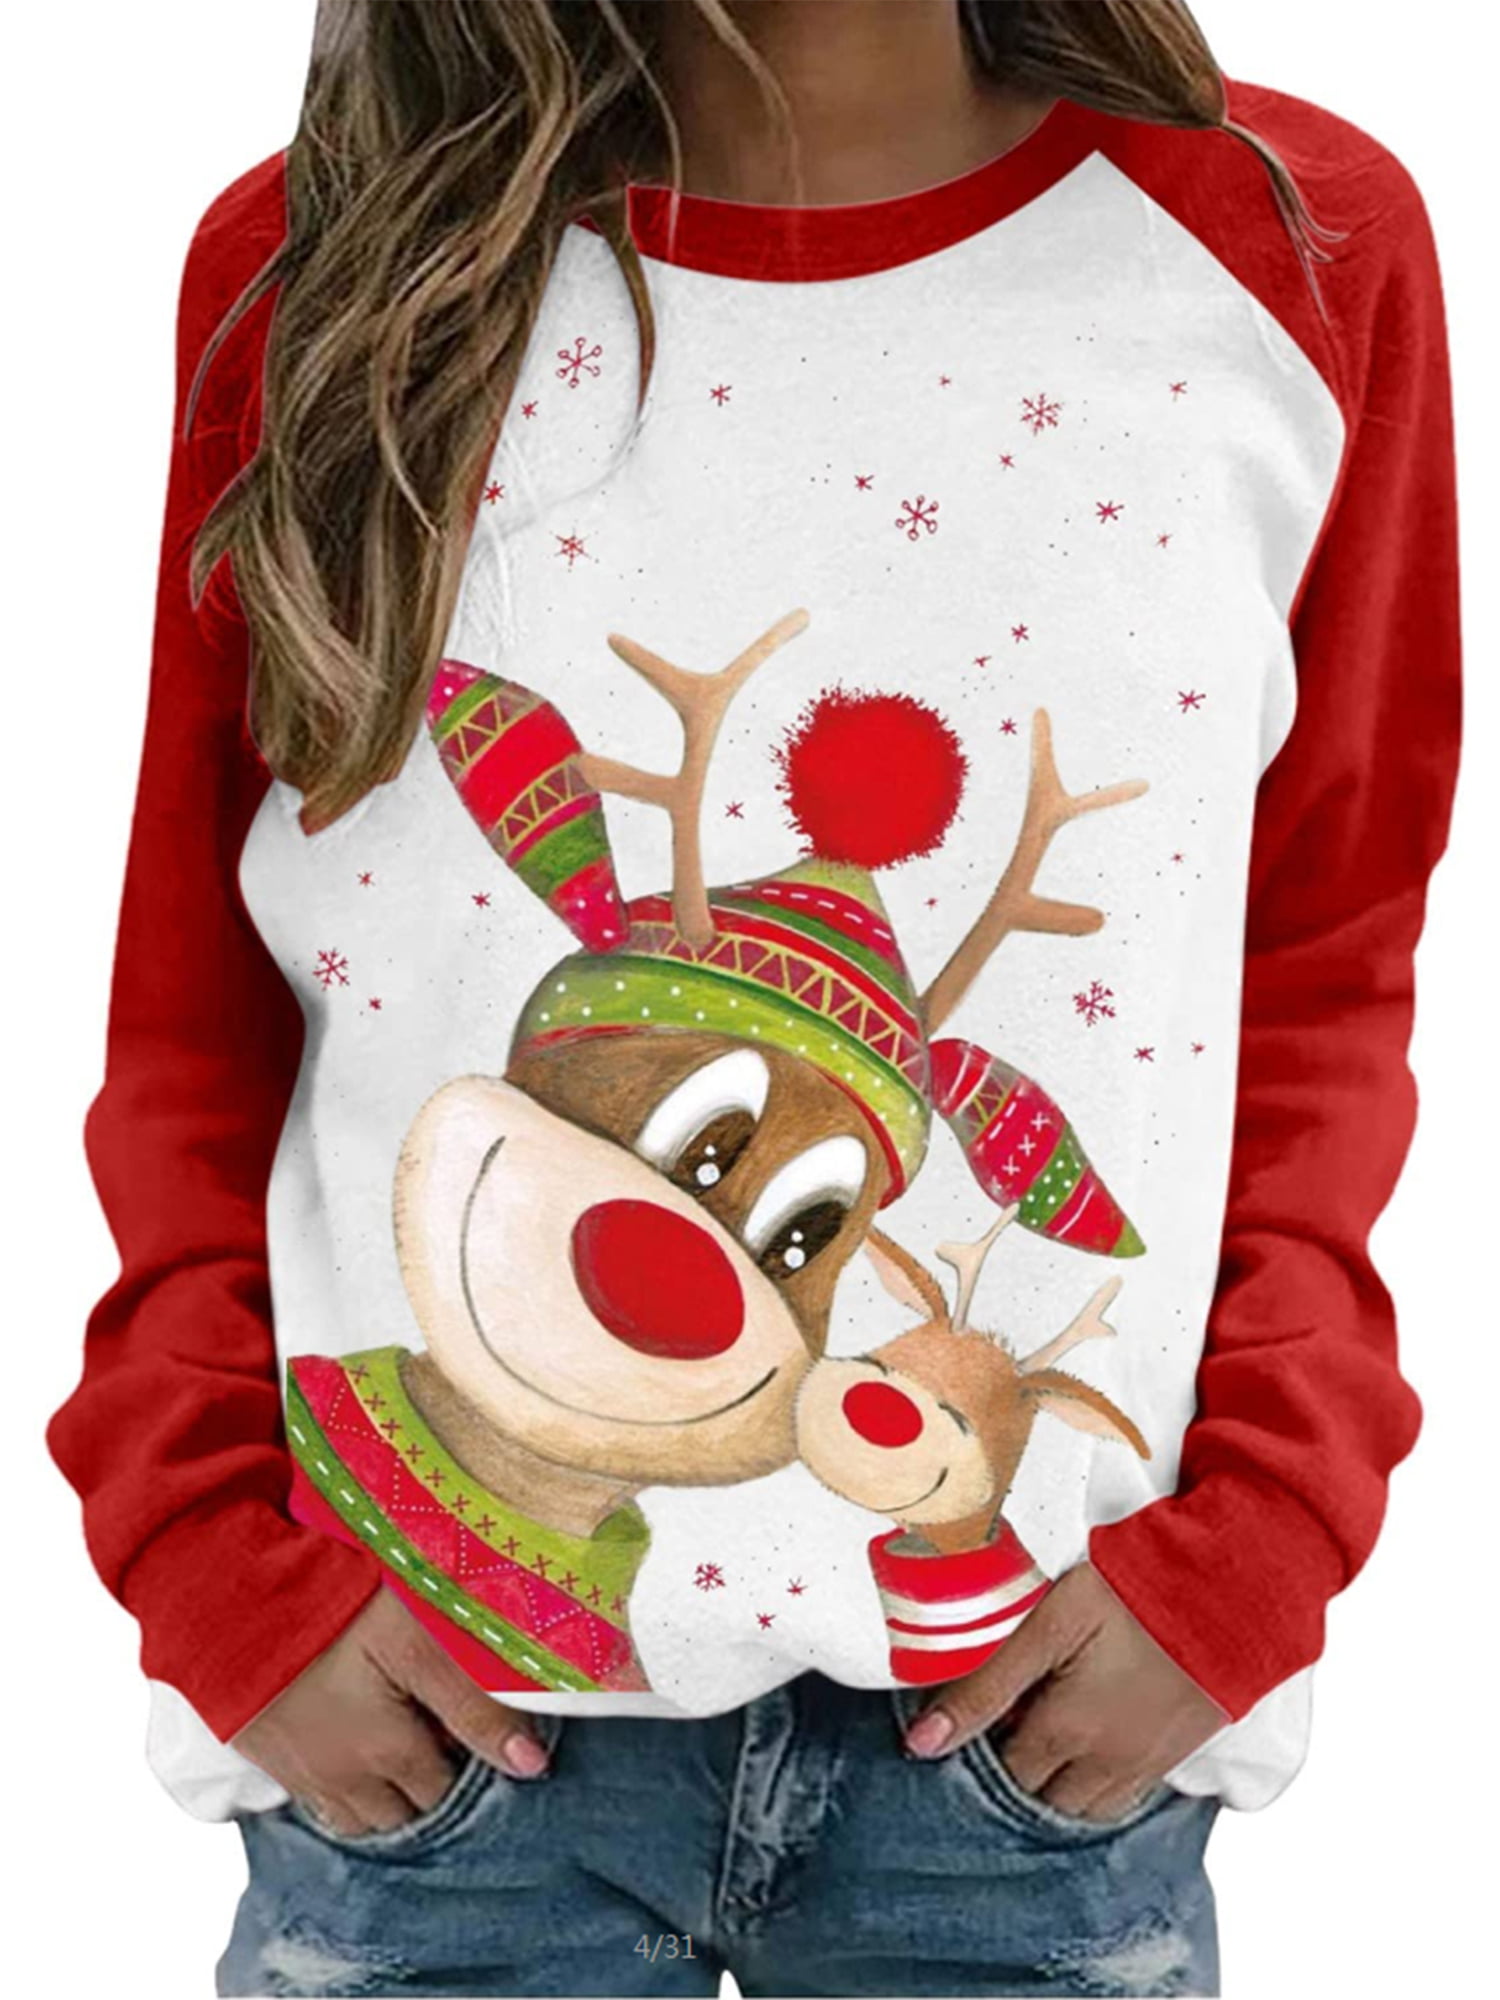 Christmas Long Sleeve Shirts for Women Plus Size Trendy Crewneck Sweatshirts Gnome Reindeer Graphic Plaid Splicing Tops